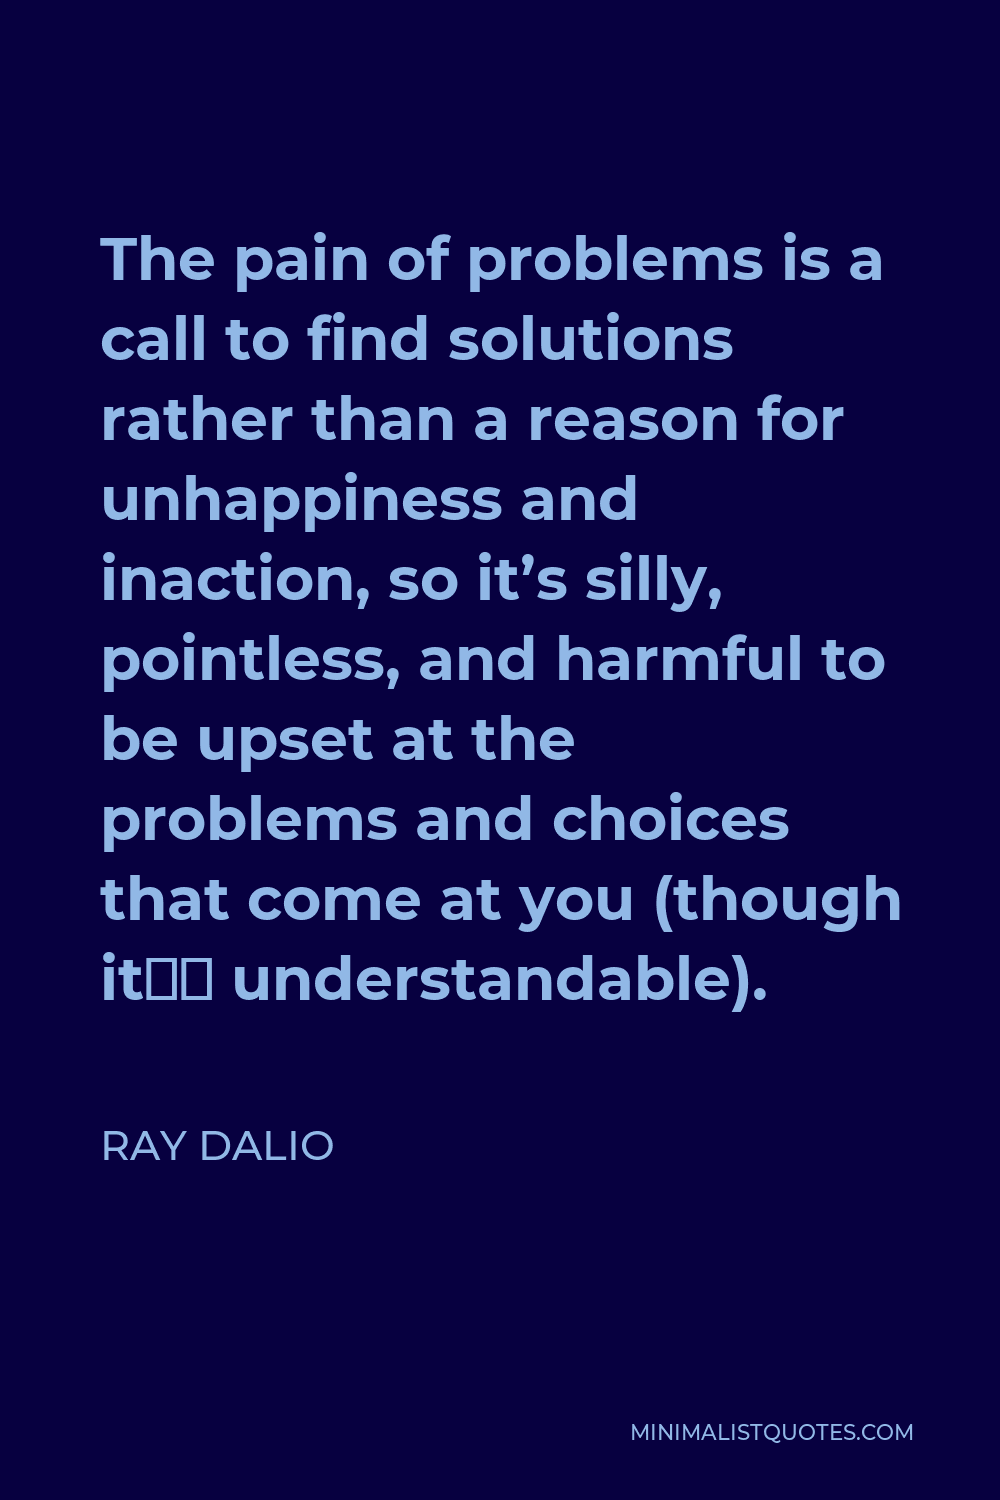 Ray Dalio Quote - The pain of problems is a call to find solutions rather than a reason for unhappiness and inaction, so it’s silly, pointless, and harmful to be upset at the problems and choices that come at you (though it’s understandable).